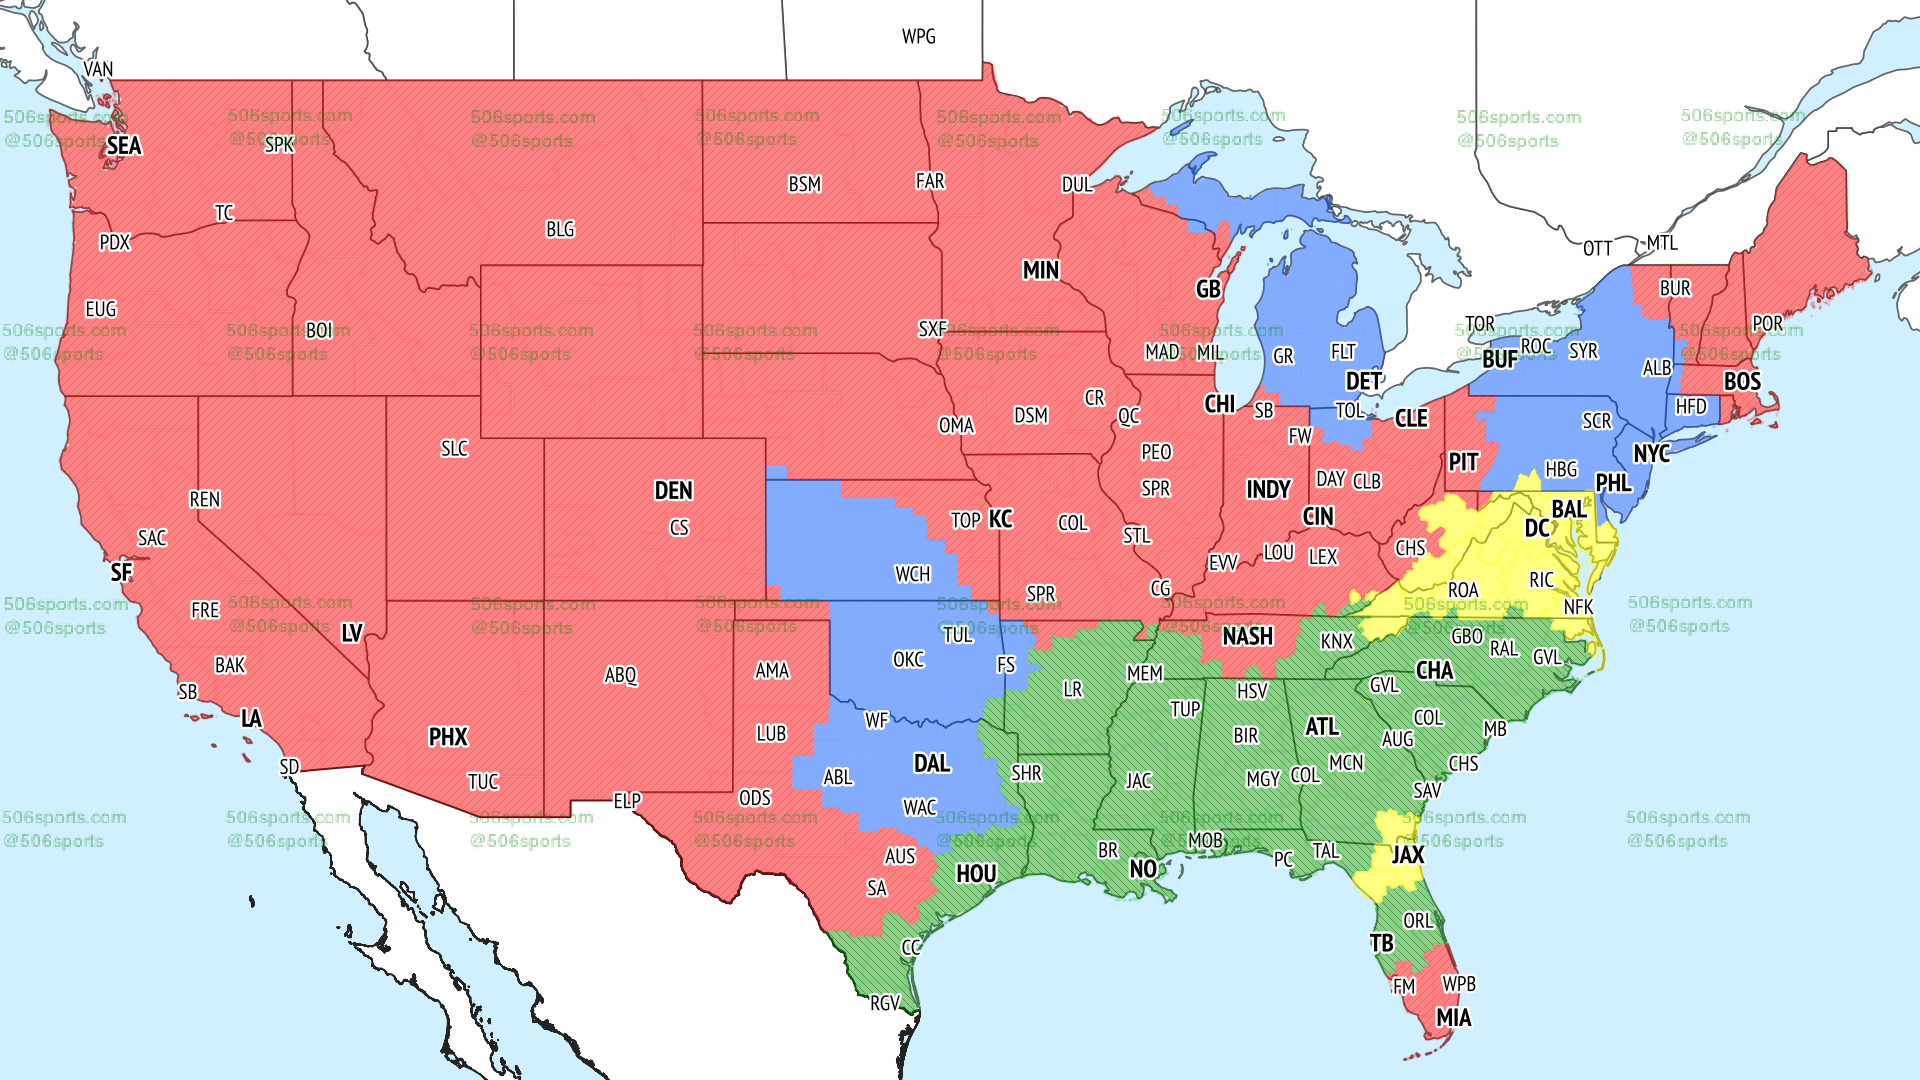 NFL coverage map of early FOX games in Week 1